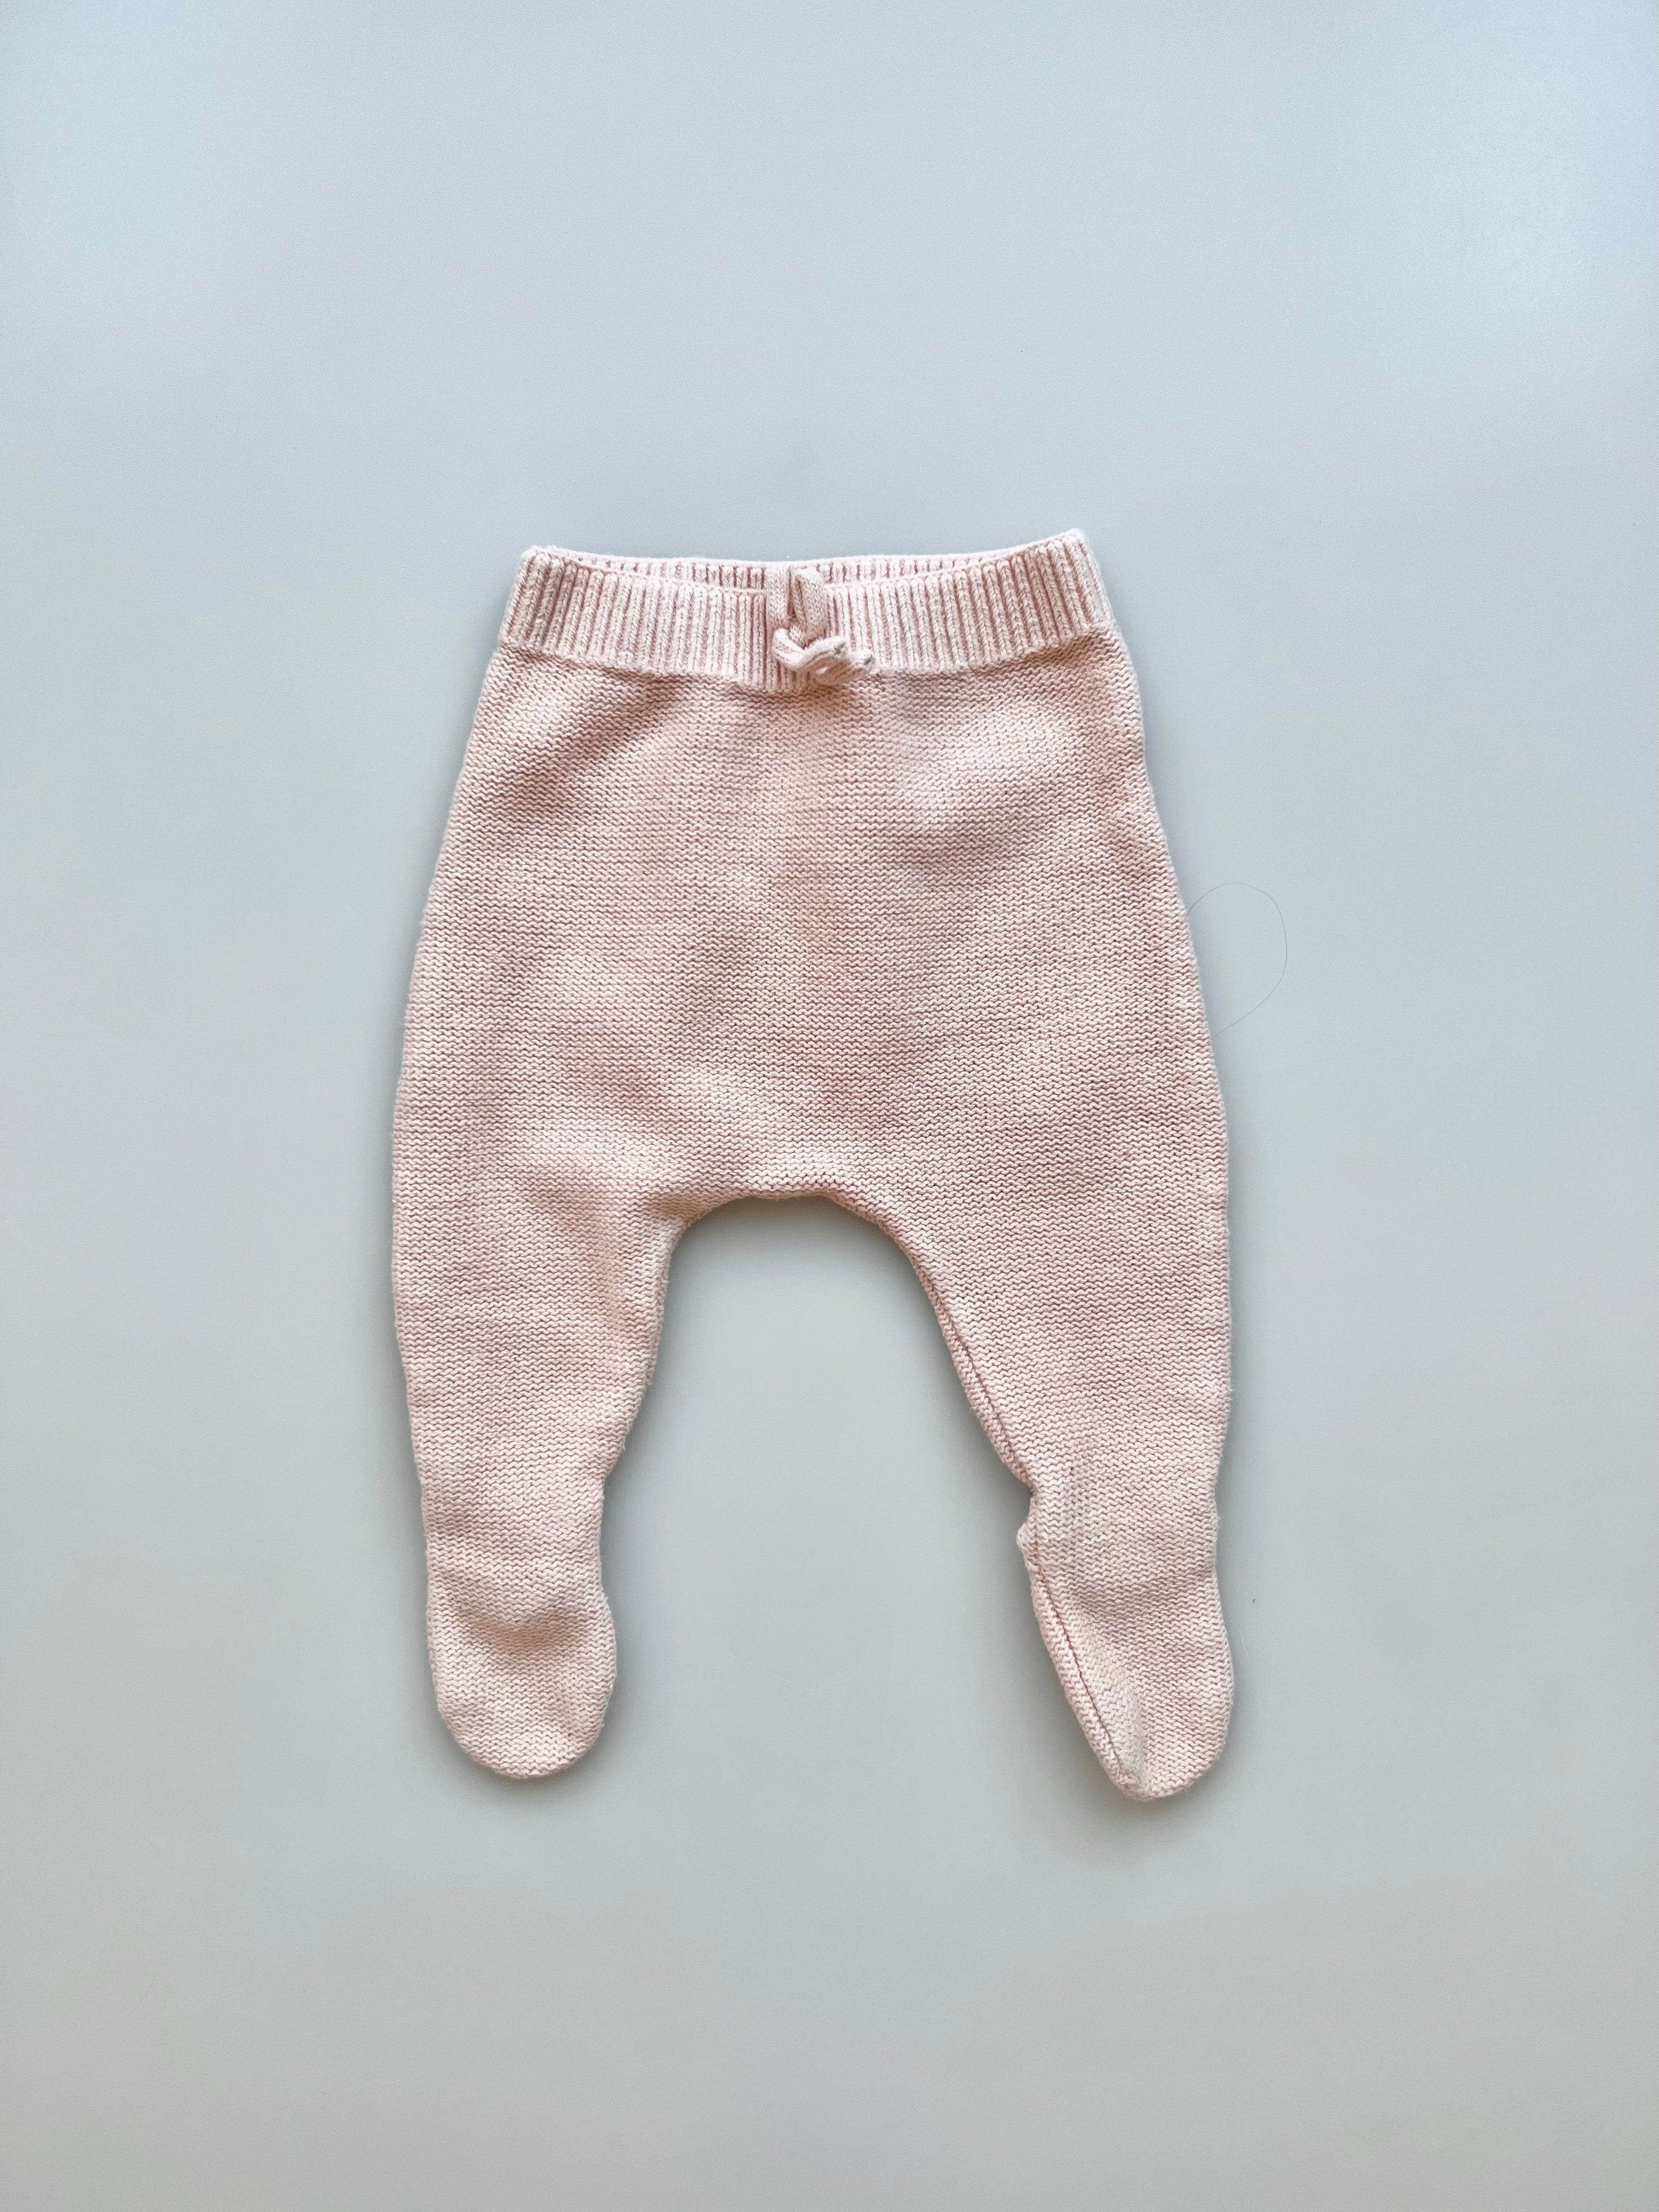 Zara Pink Knitted Trousers 0-1 Months